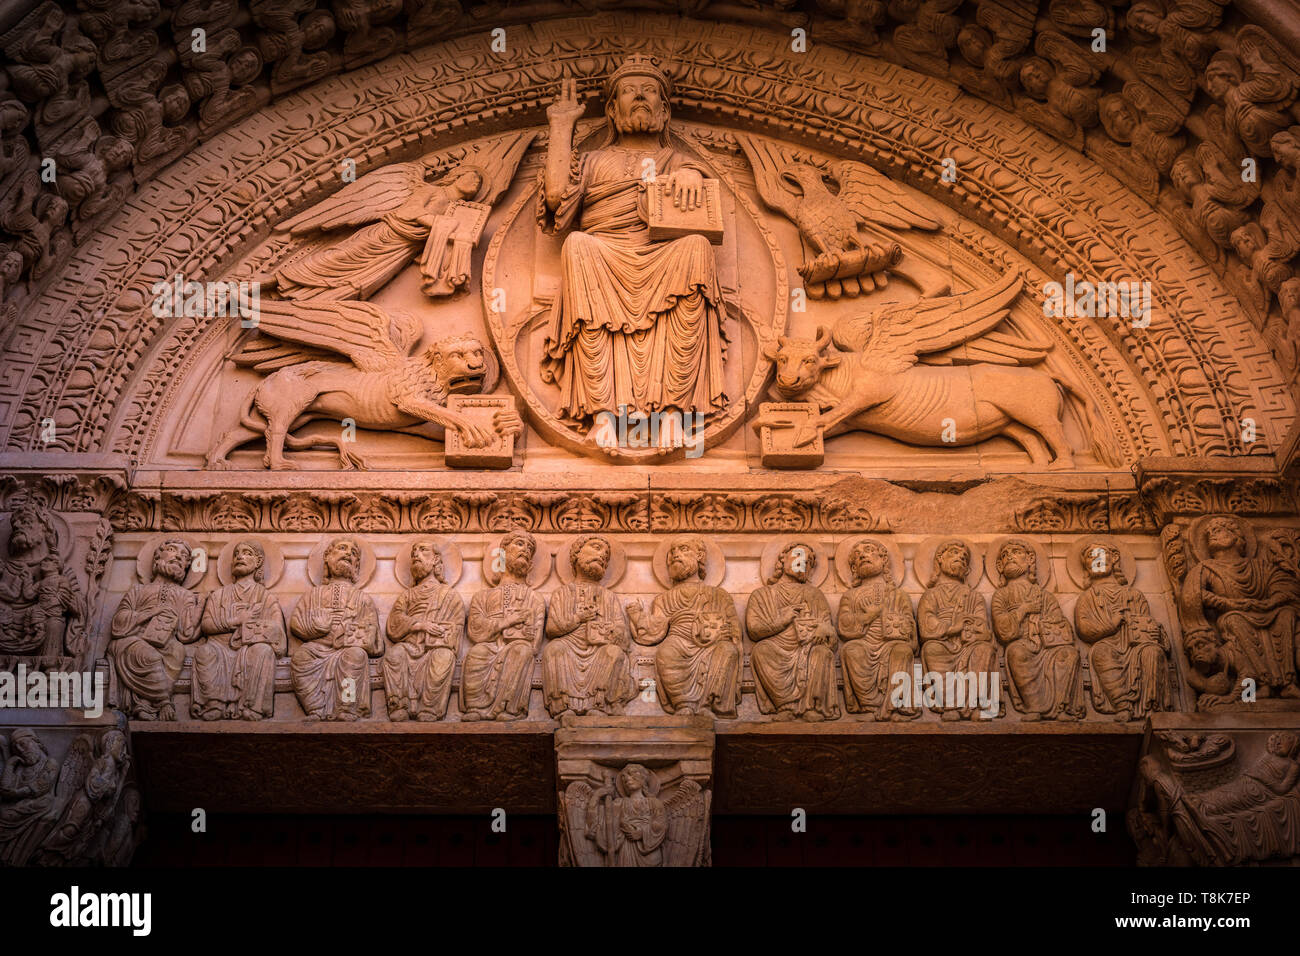 West portal of Cathedral of Saint Trophime in Arles. Tympanum shows Christ with the symbols of the Evangelists. National Heritage Site of France. UNES Stock Photo